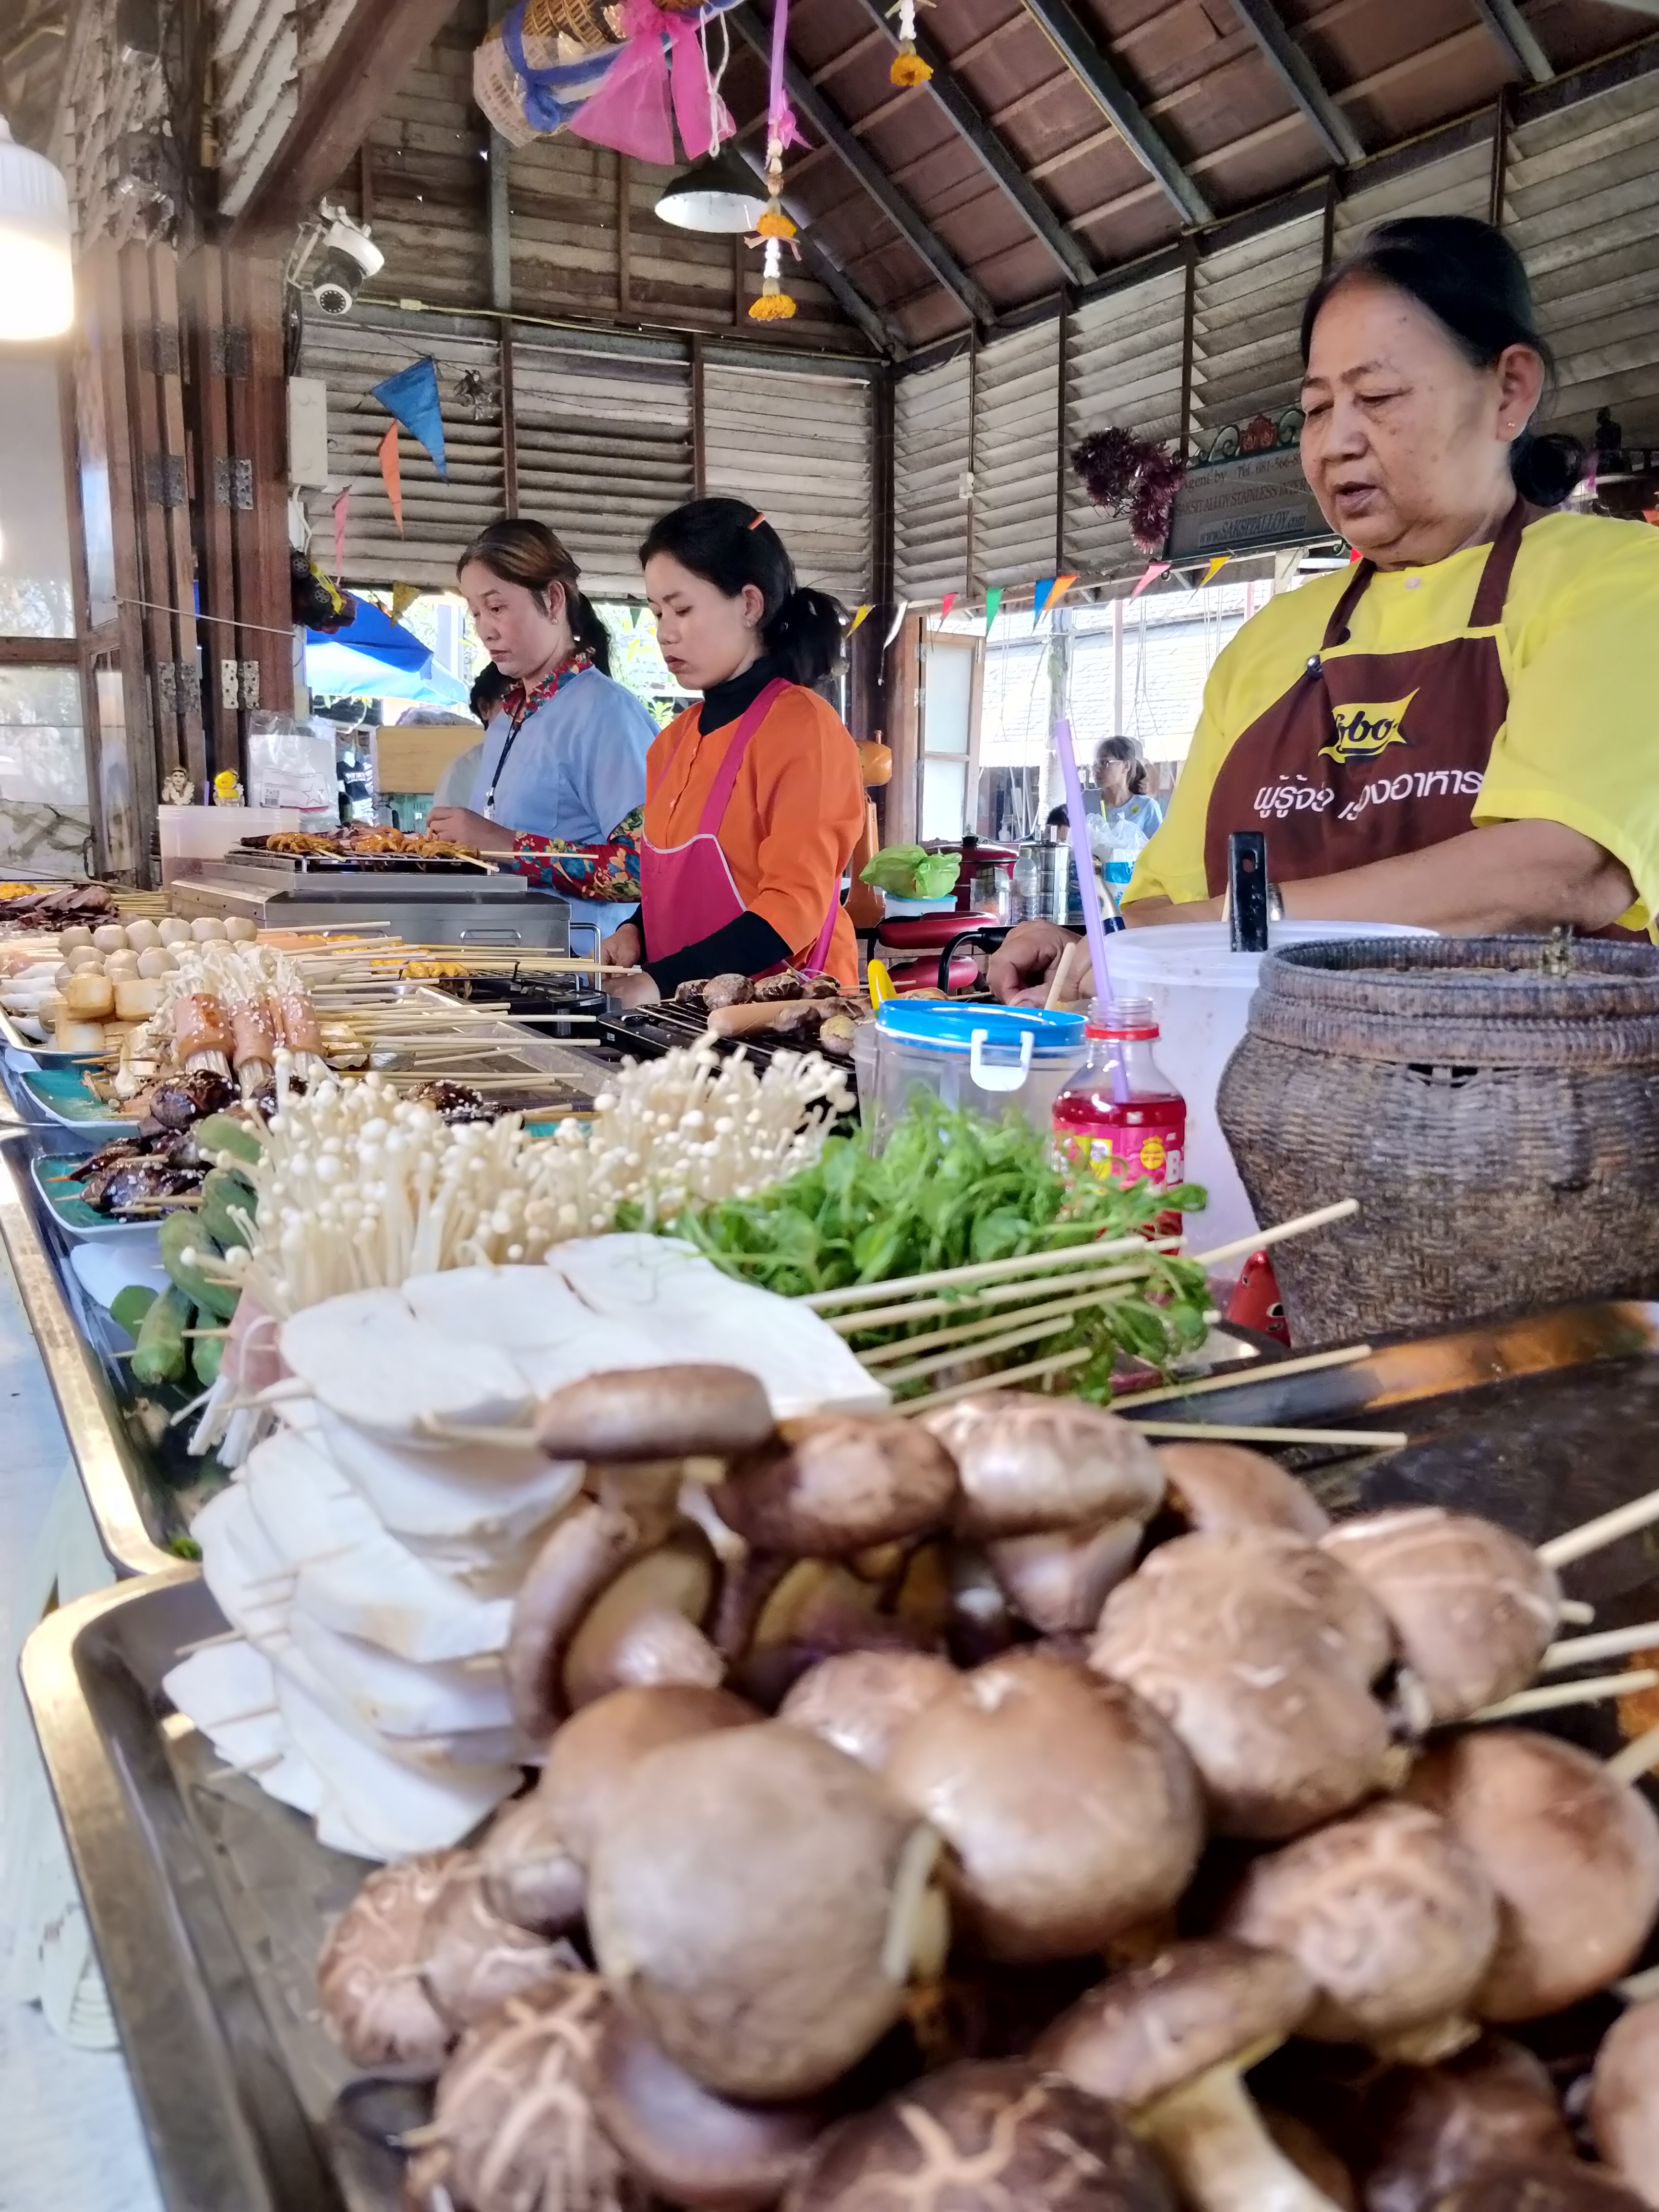 the view of the local food stalls in the Pattaya Floating Market, Thailand